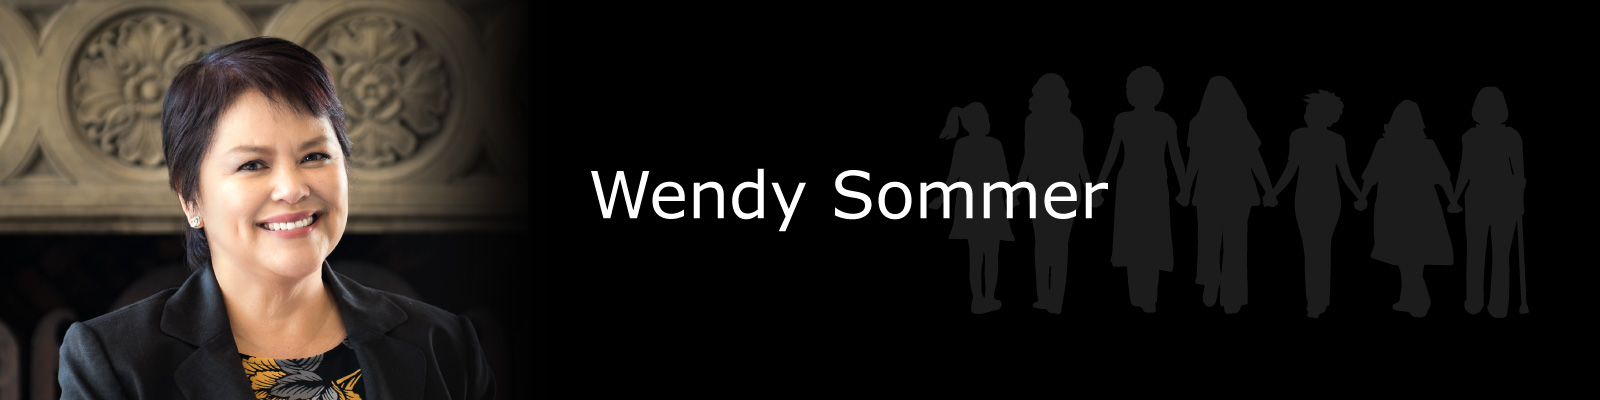 Photo of Wendy Sommer.